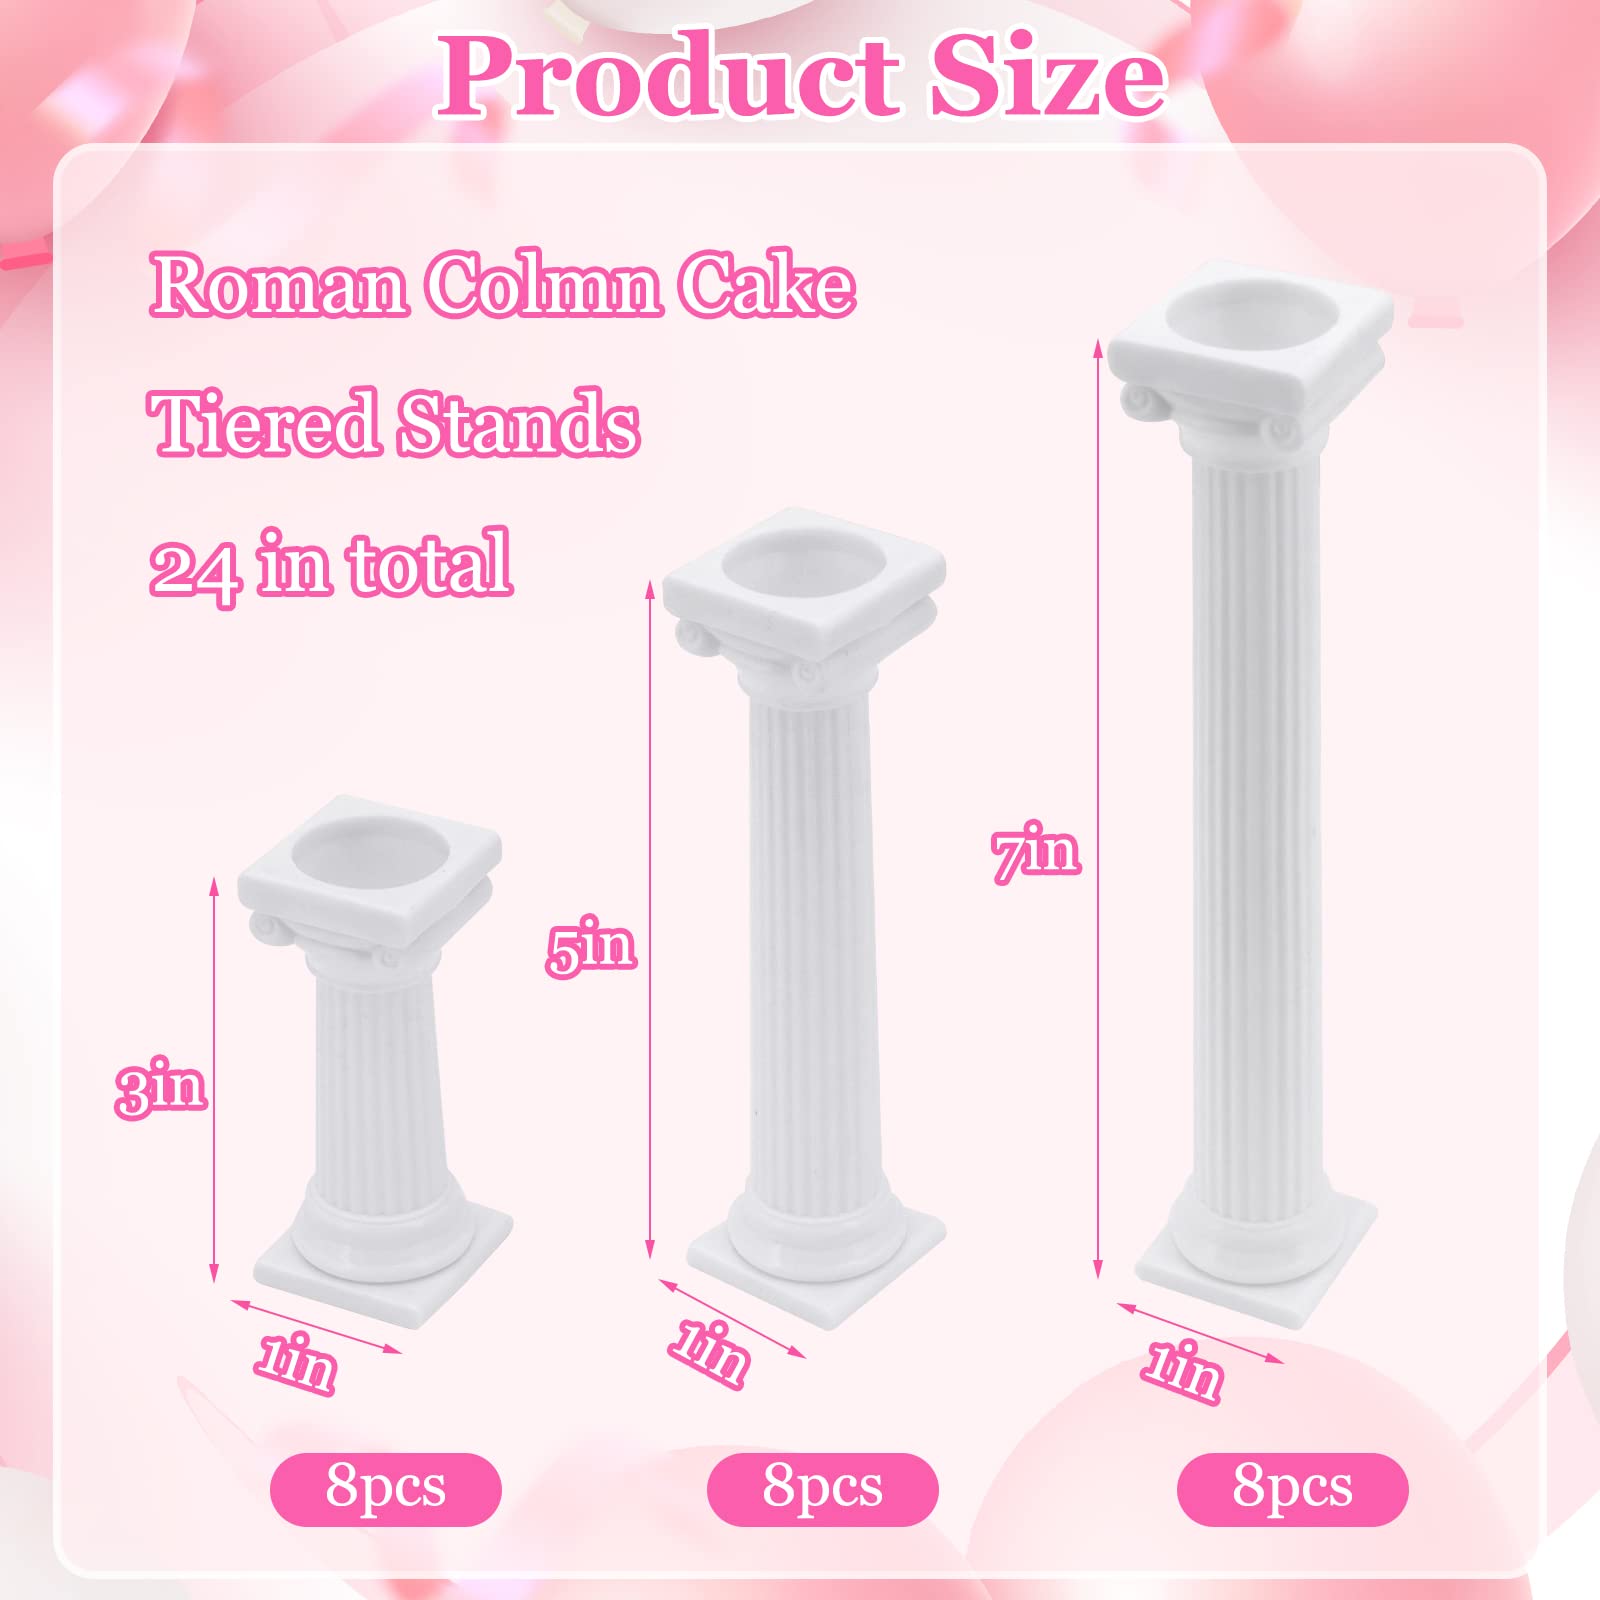 Hooshion 24 Pcs 3 Size Roman Column Cake Tiered Stands, Fondant Cakes Tier Separator Support Stand, Cake Pillars for Wedding Cakes, Multilayer Wedding Cake Decoration Support Tool Sets